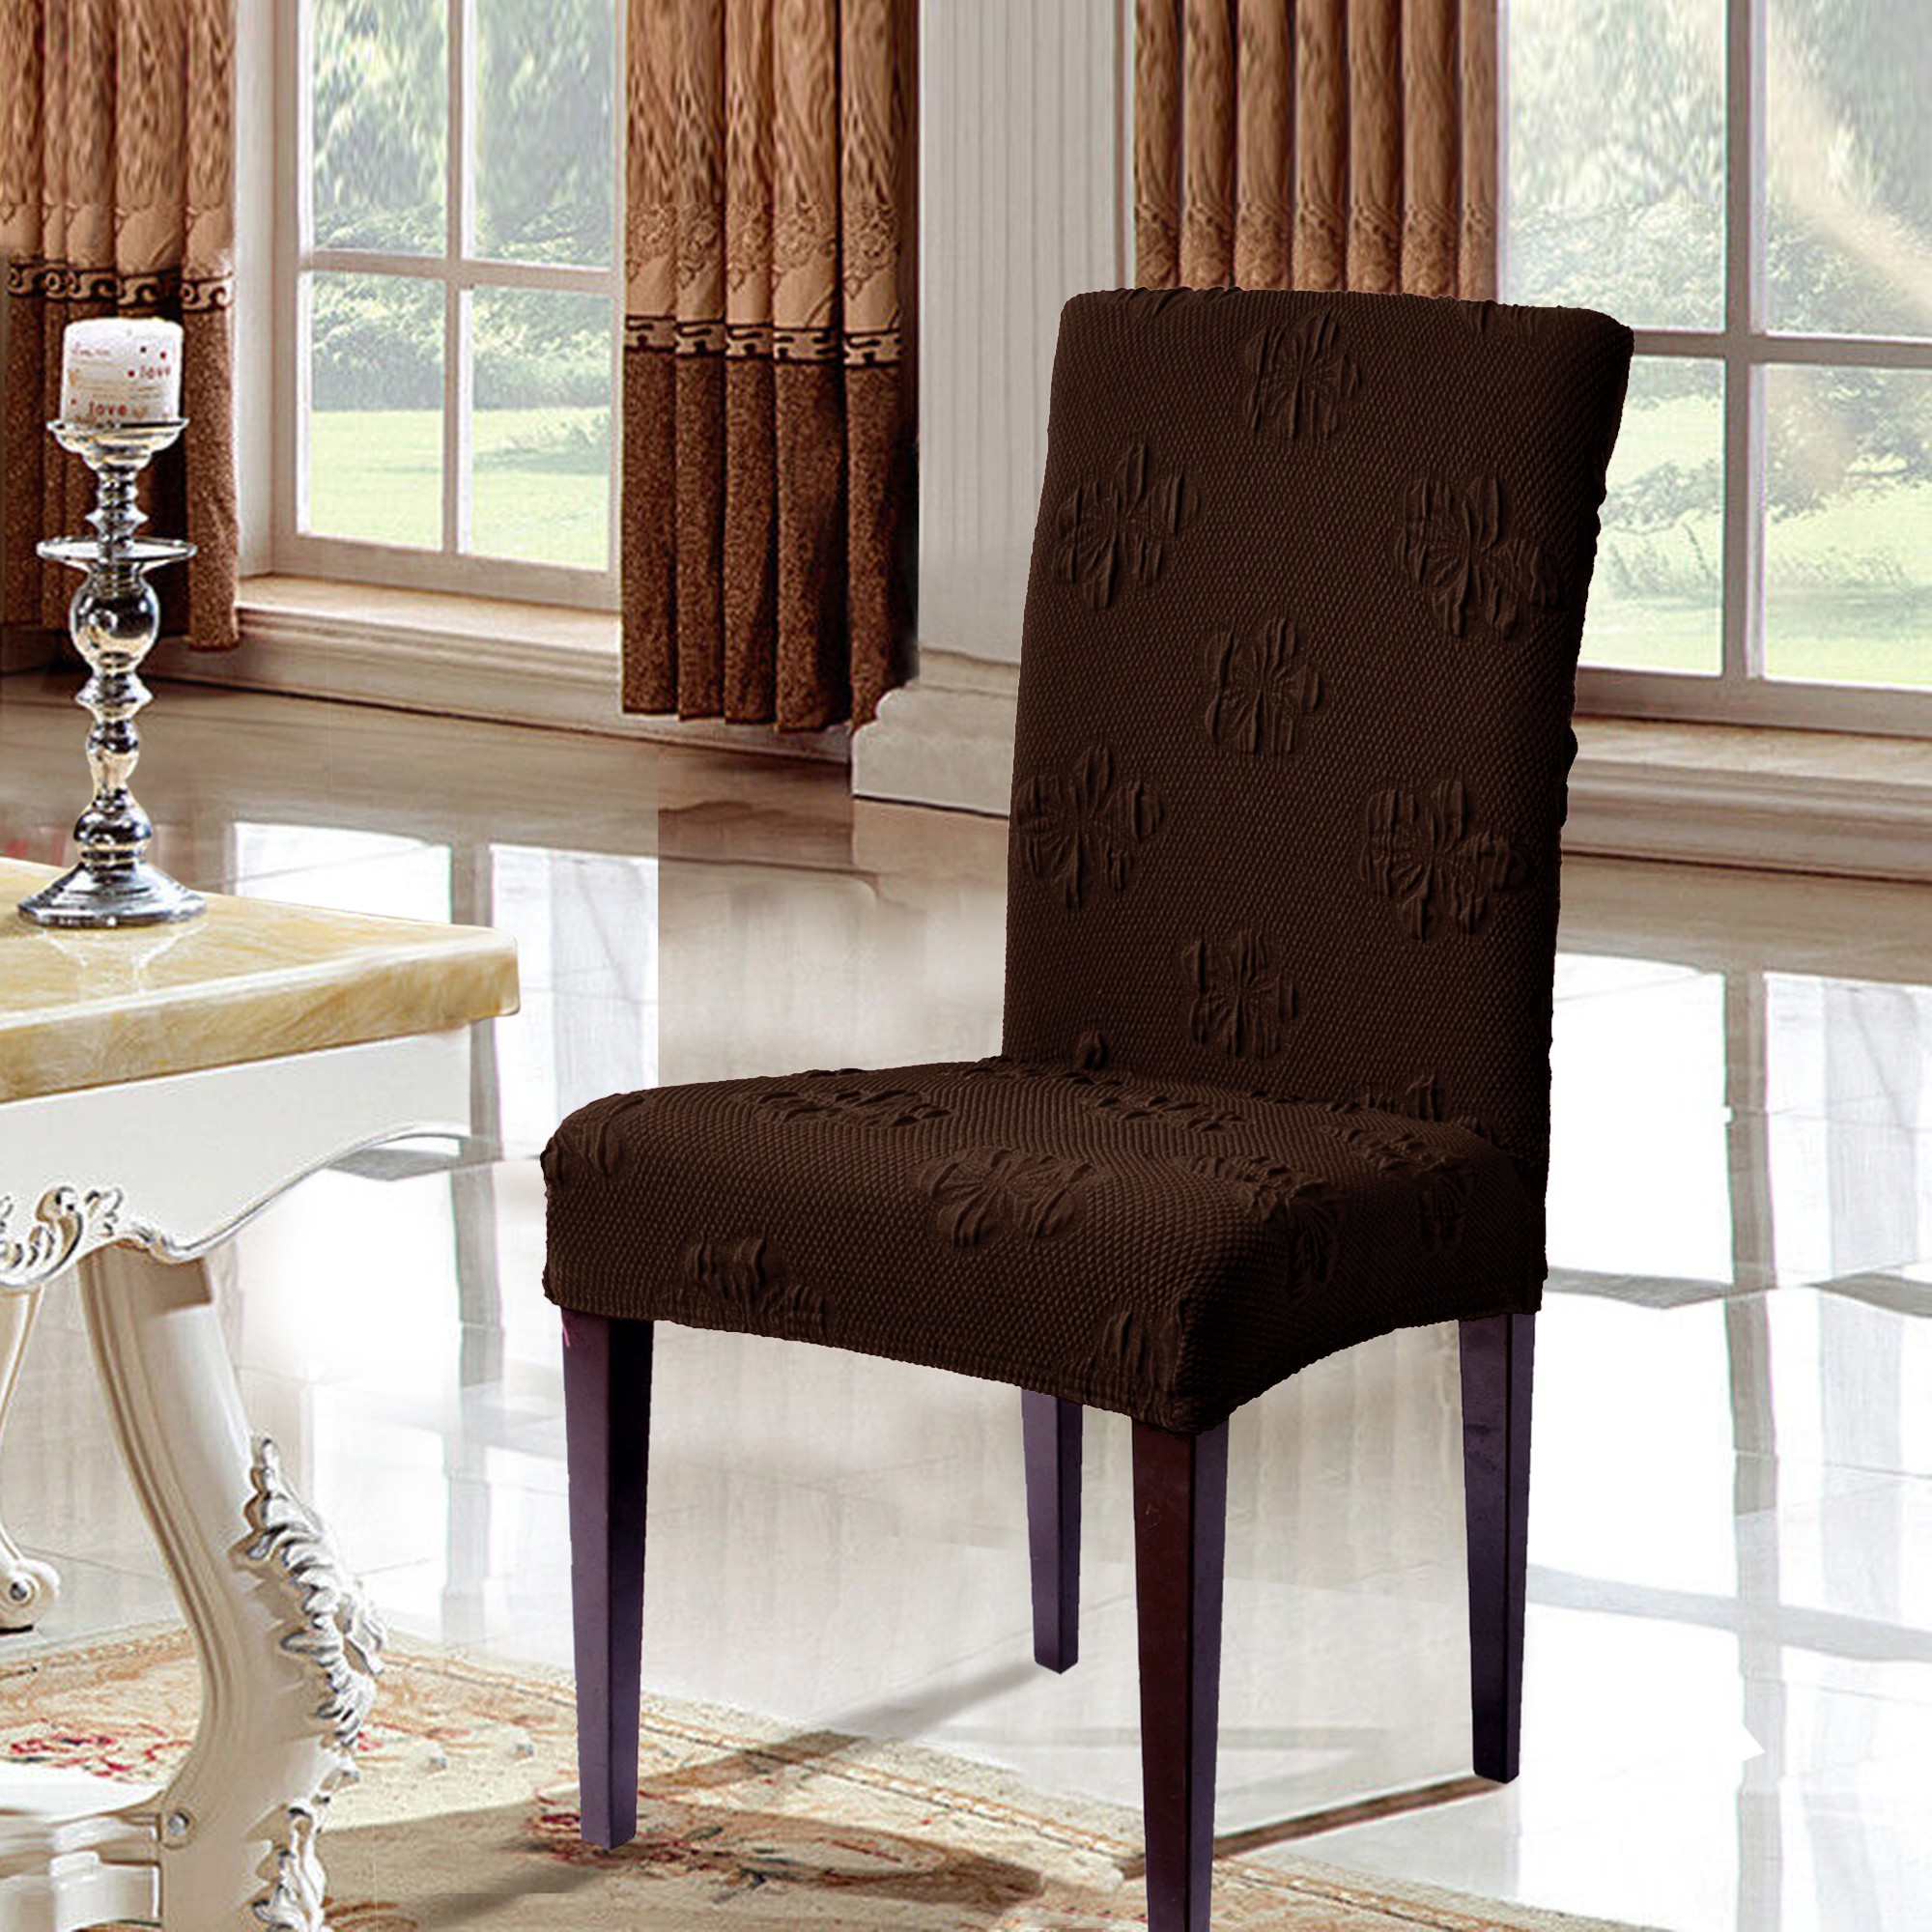 Box Cushion Dining Chair Slipcover (Set of 2)